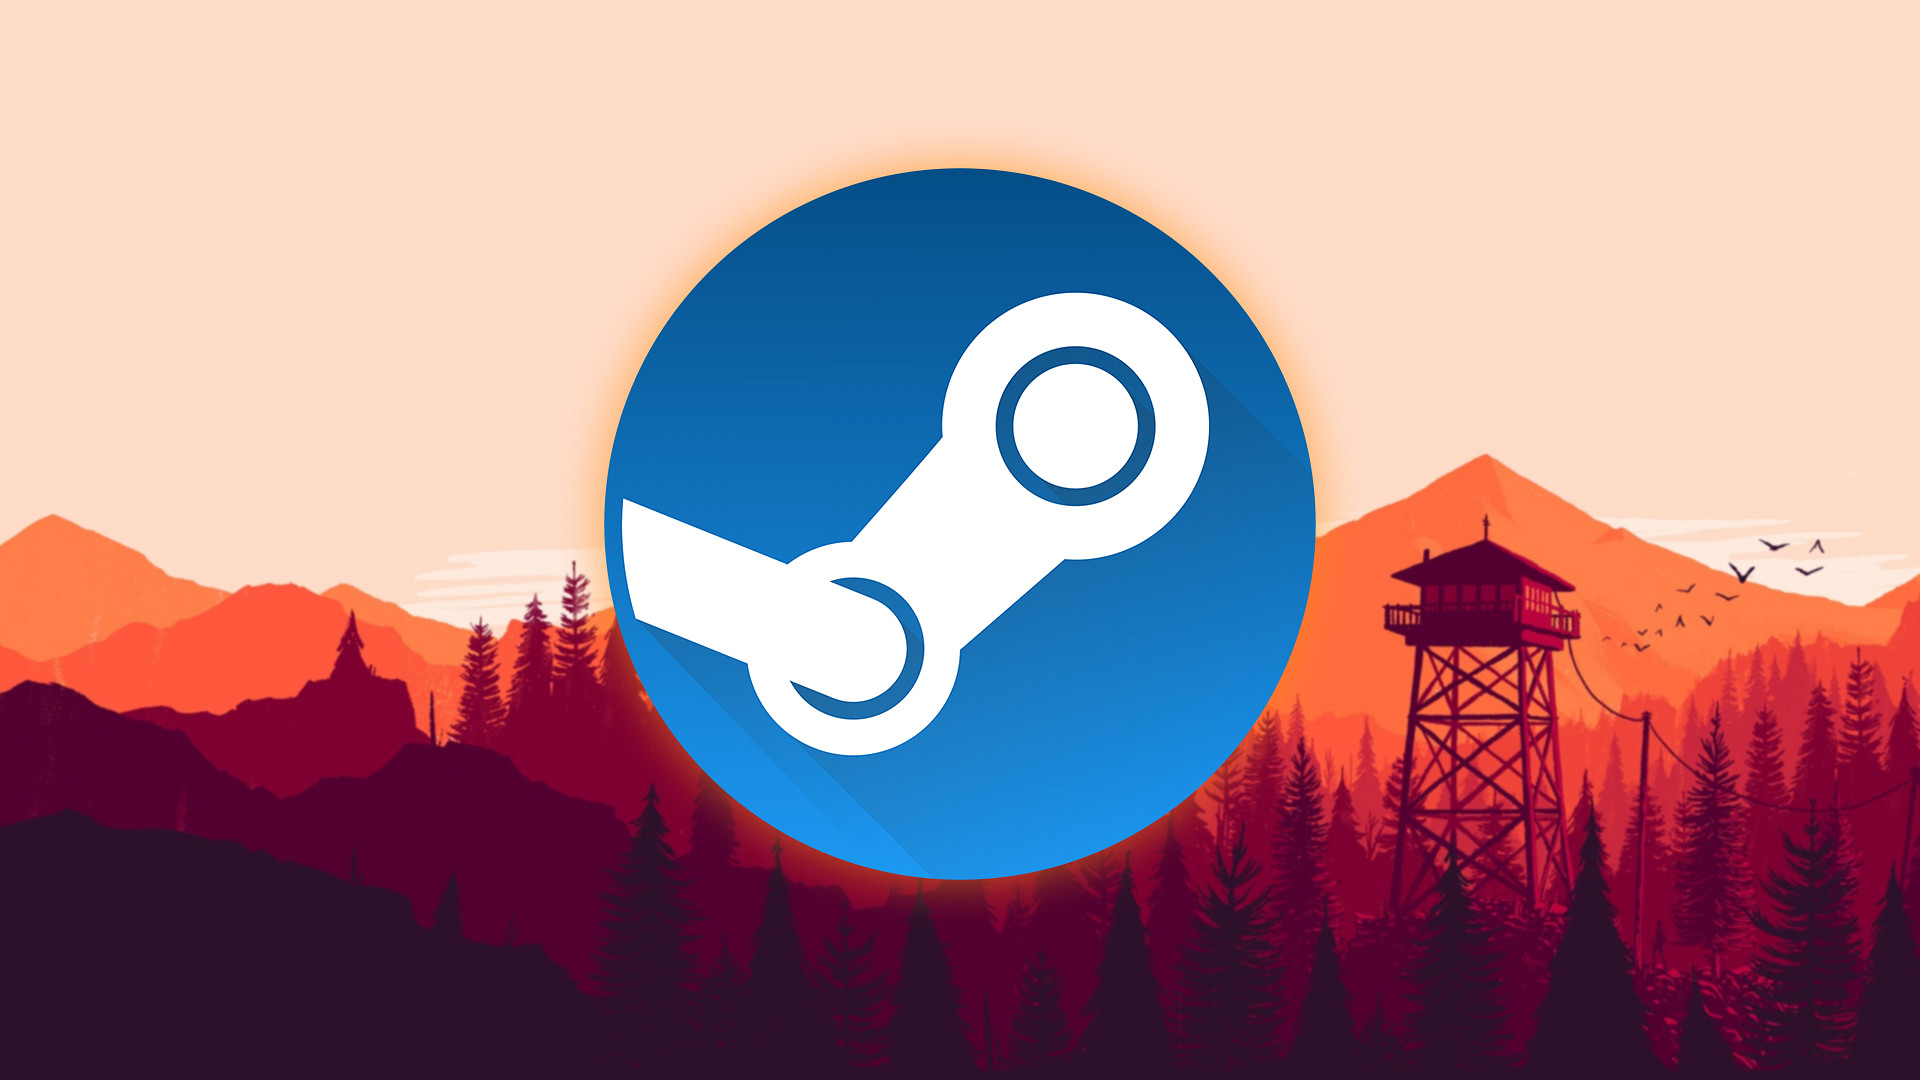 Valve reveals dates for all 2023 Steam sales and Next Fest